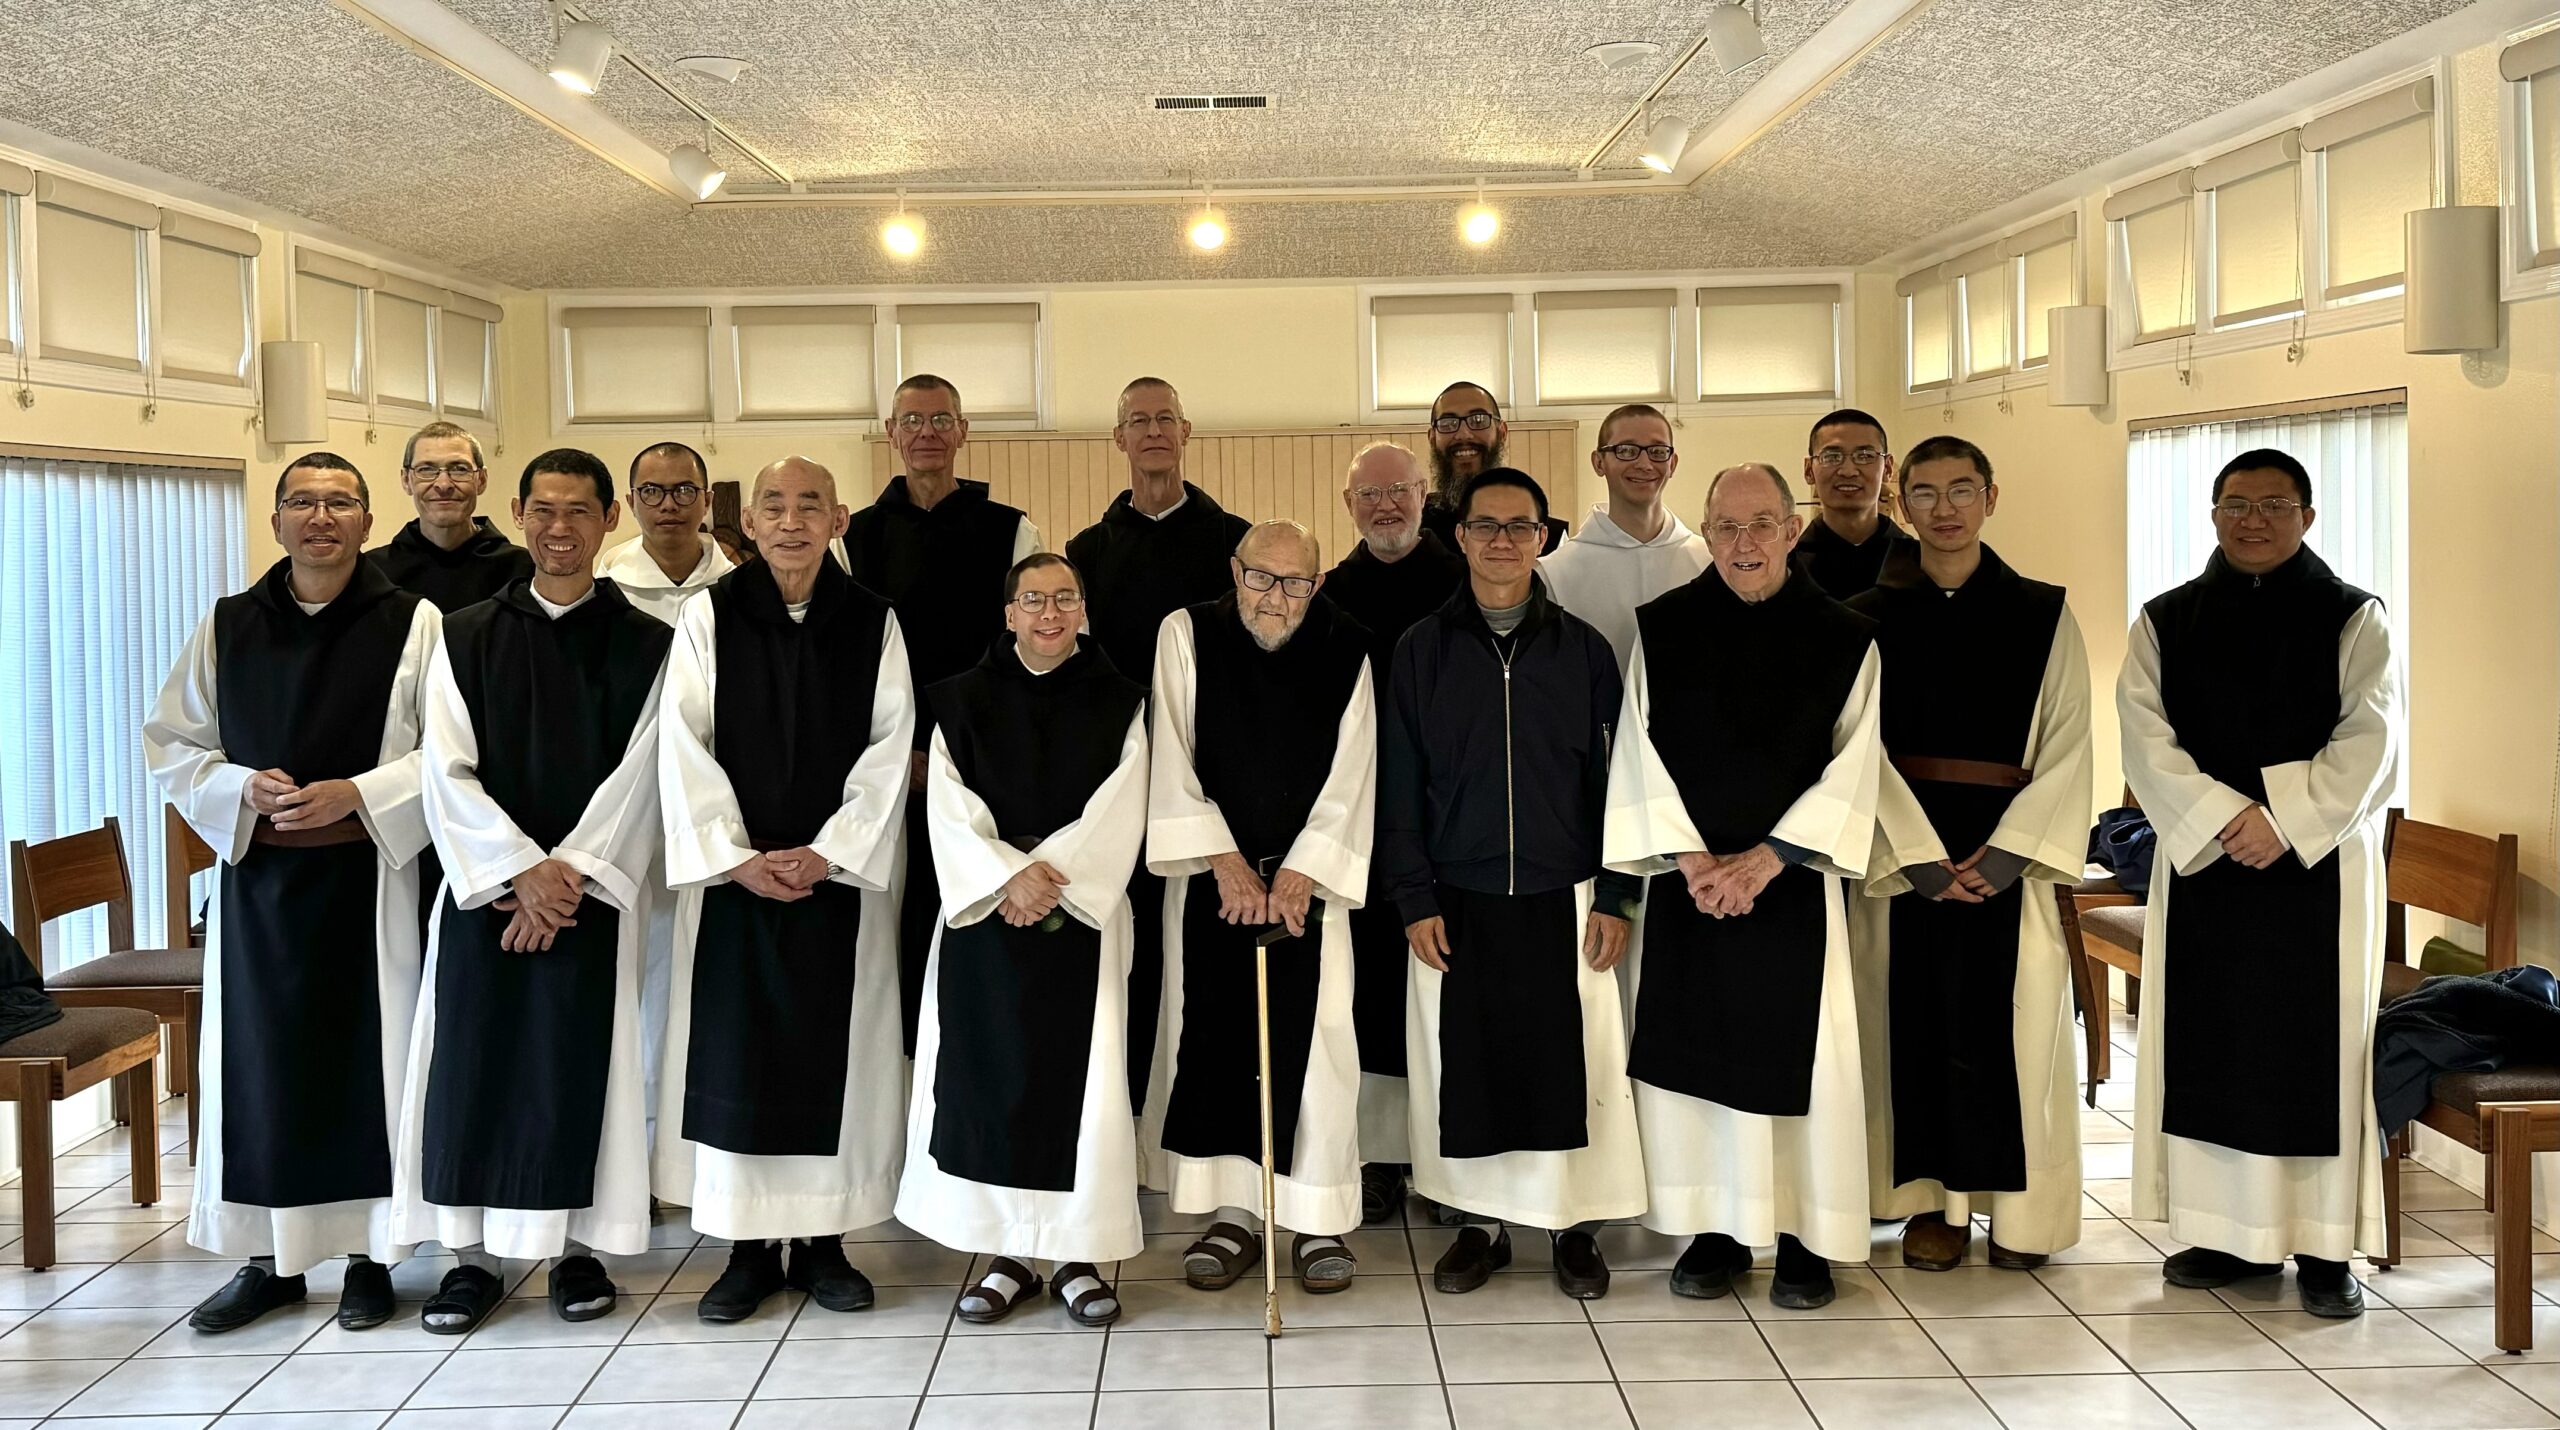 Abbey of New Clairvaux monastic community picture, 2024